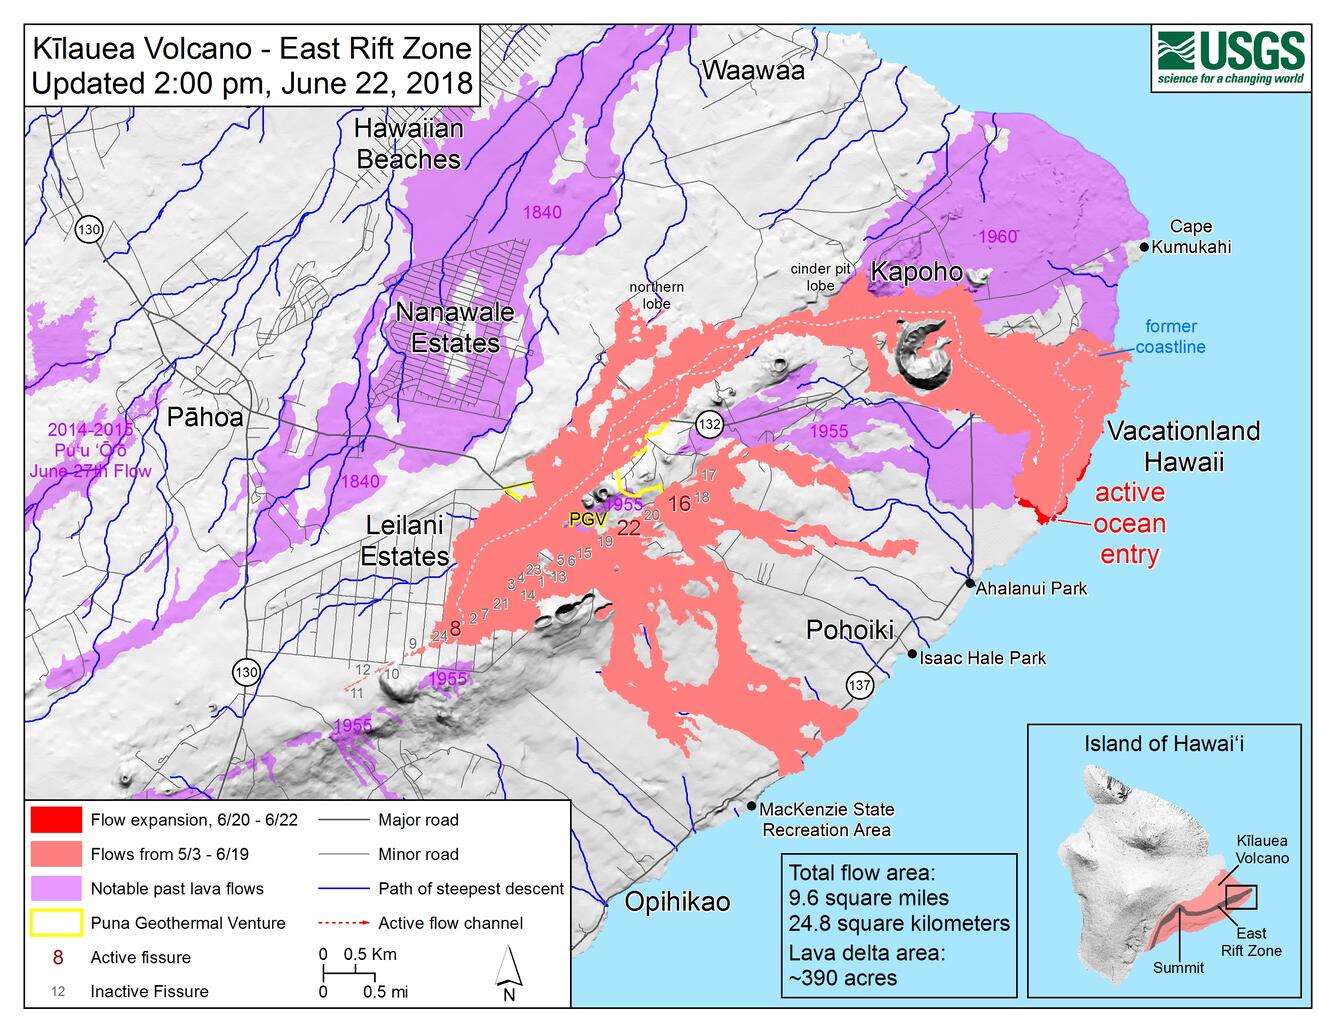 Kīlauea lower East Rift Zone lava flows and fissures, June 22, 2:00...